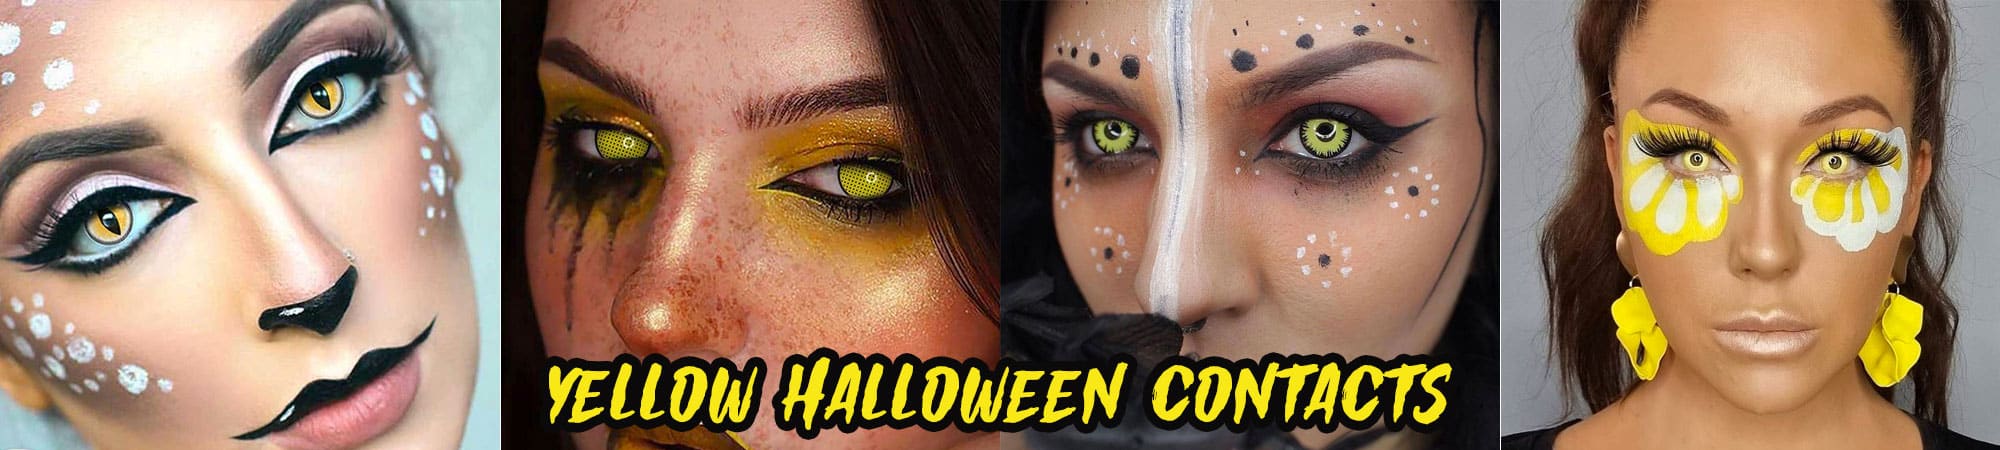 Yellow Halloween Contacts